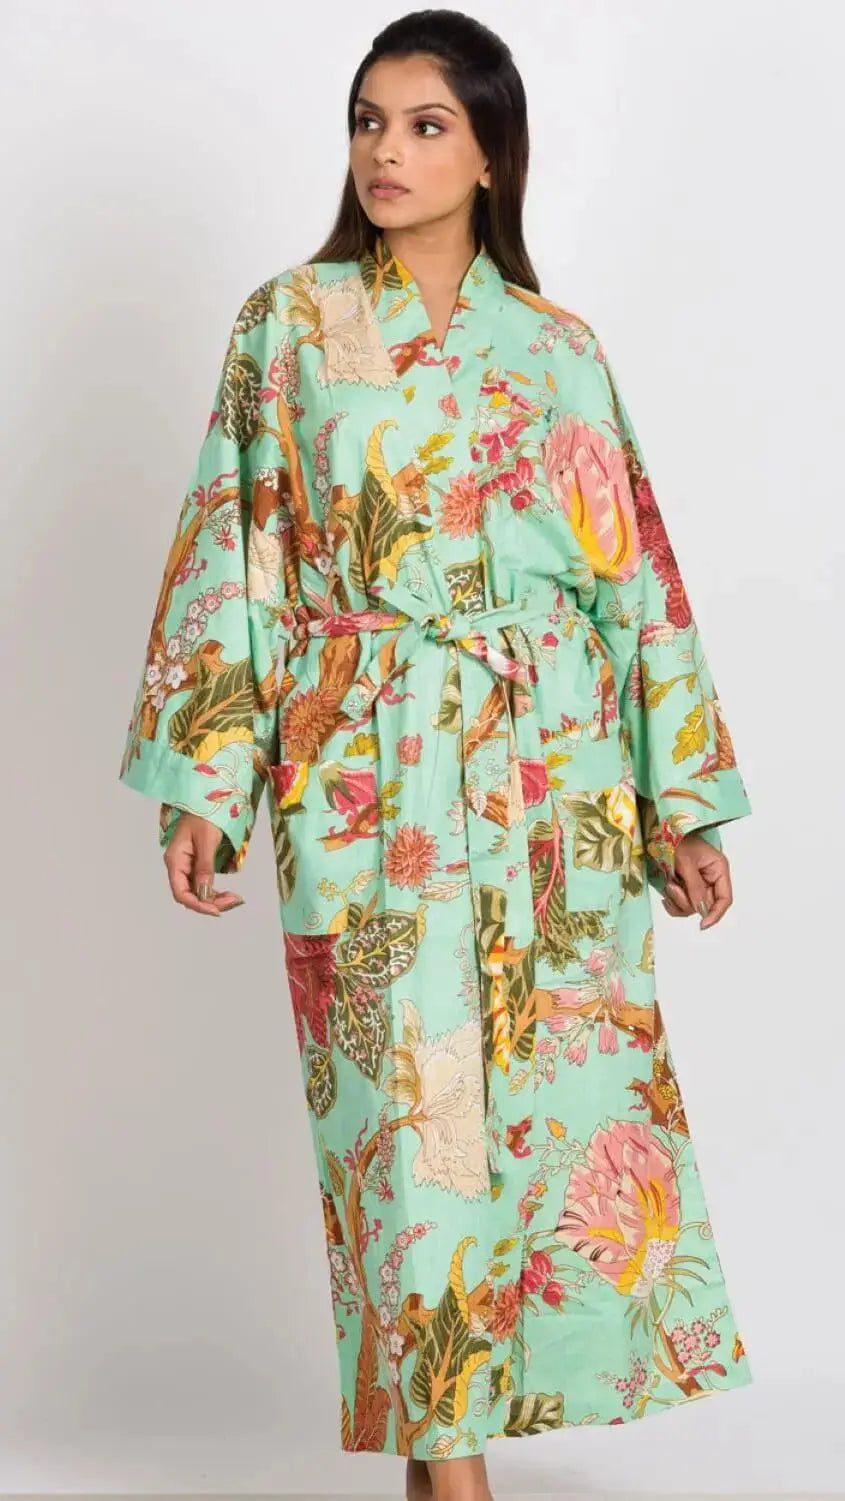 Cotton Kimono Robe in Seafoam Green Floral with Long Sleeves and Belt